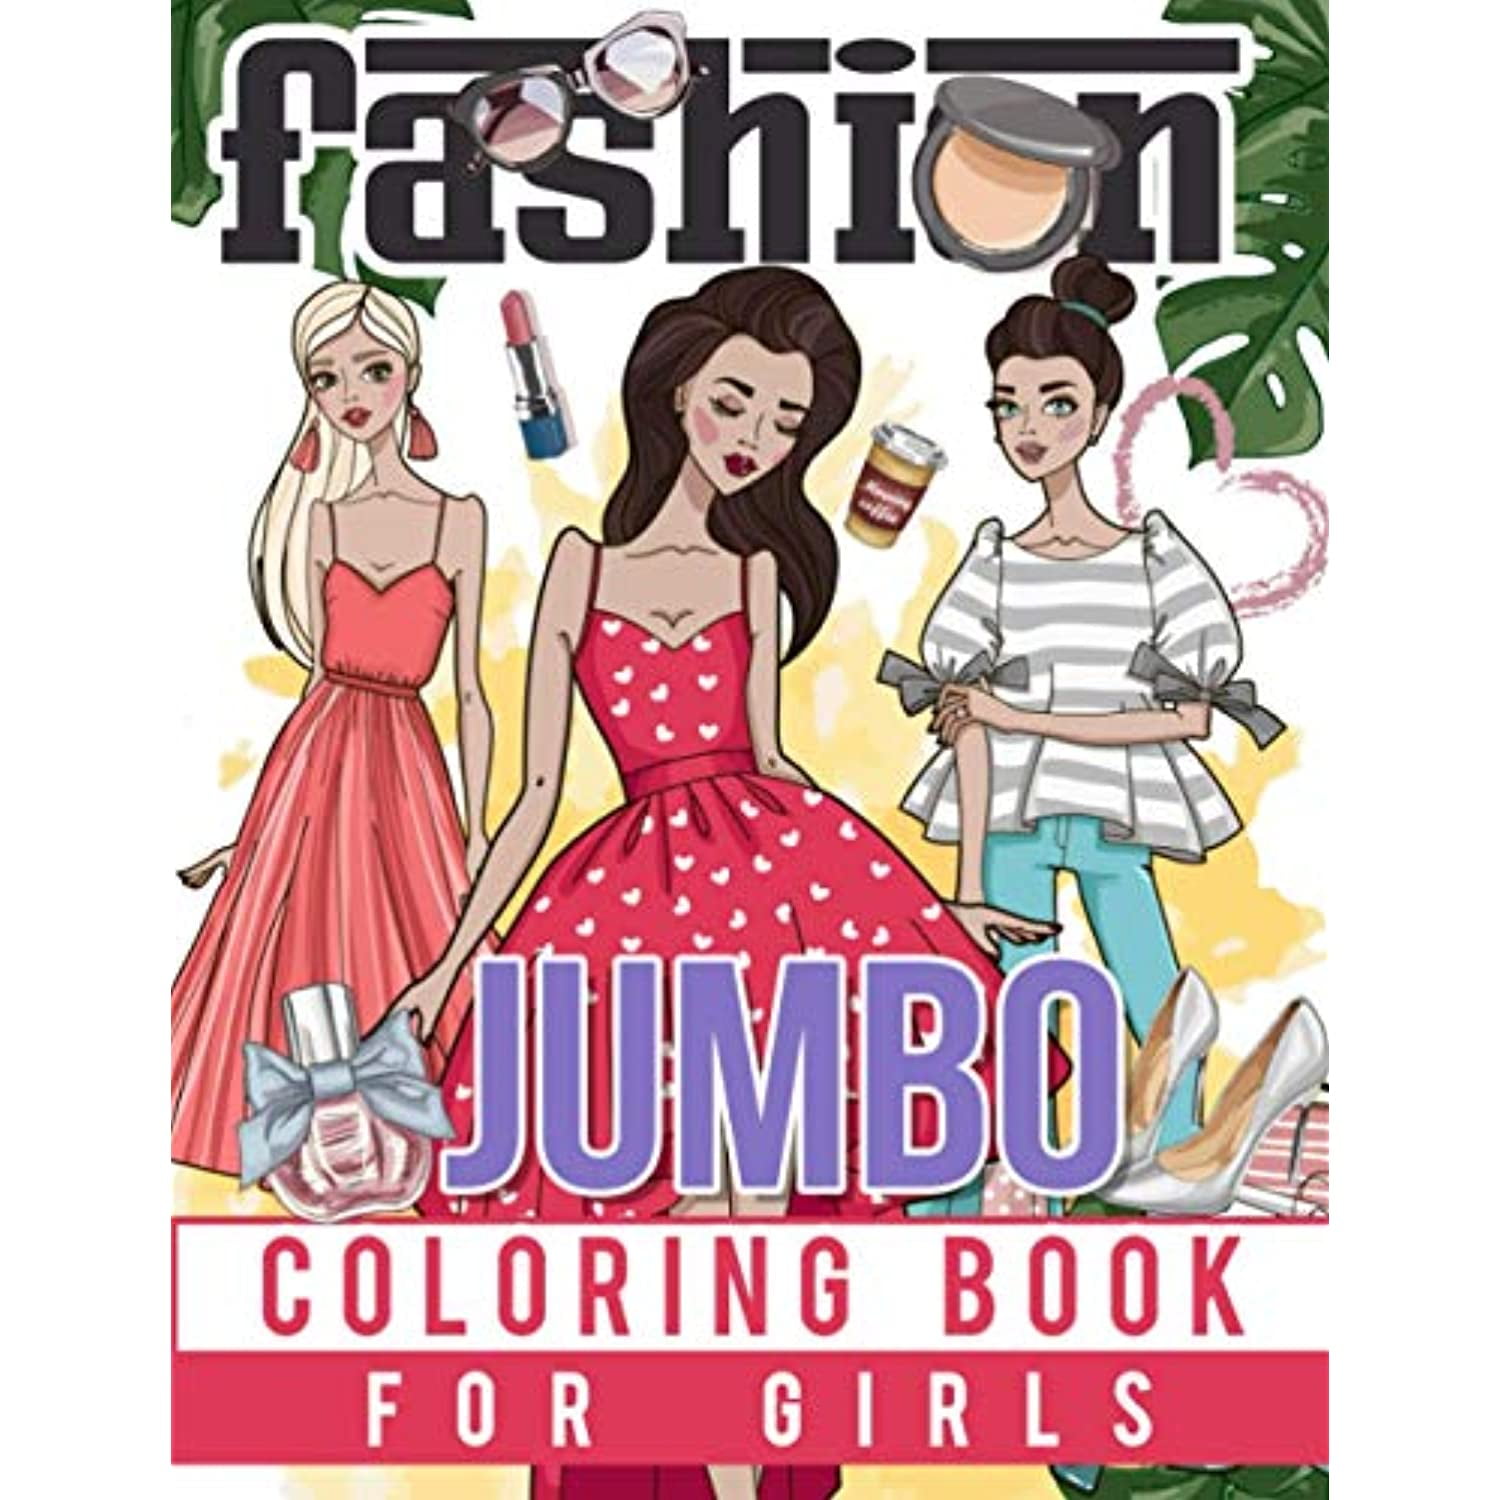 Kids and Teens With Gorgeous Beauty Fashion Style & Other Cute Designs Over 300 Fun Coloring Pages For Girls Fashion Coloring Book for Girls 